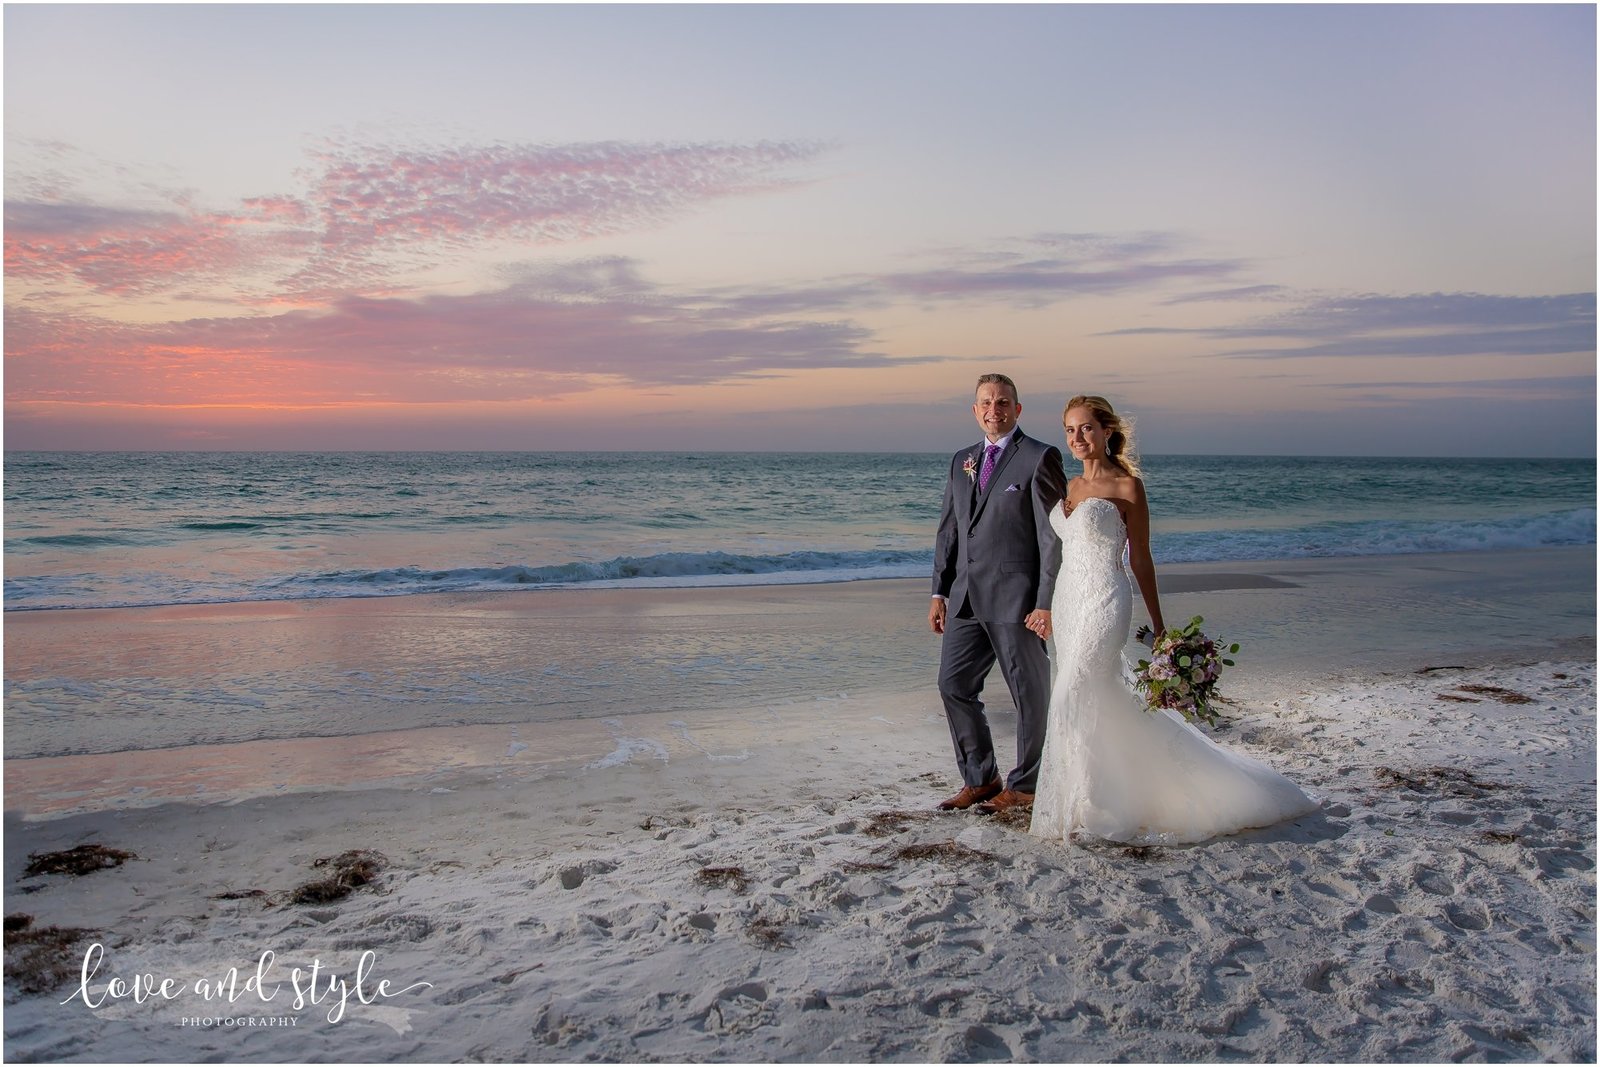 Bride and Groom walking on the beach at sunset in front of The Beach House on Anna Maria Island